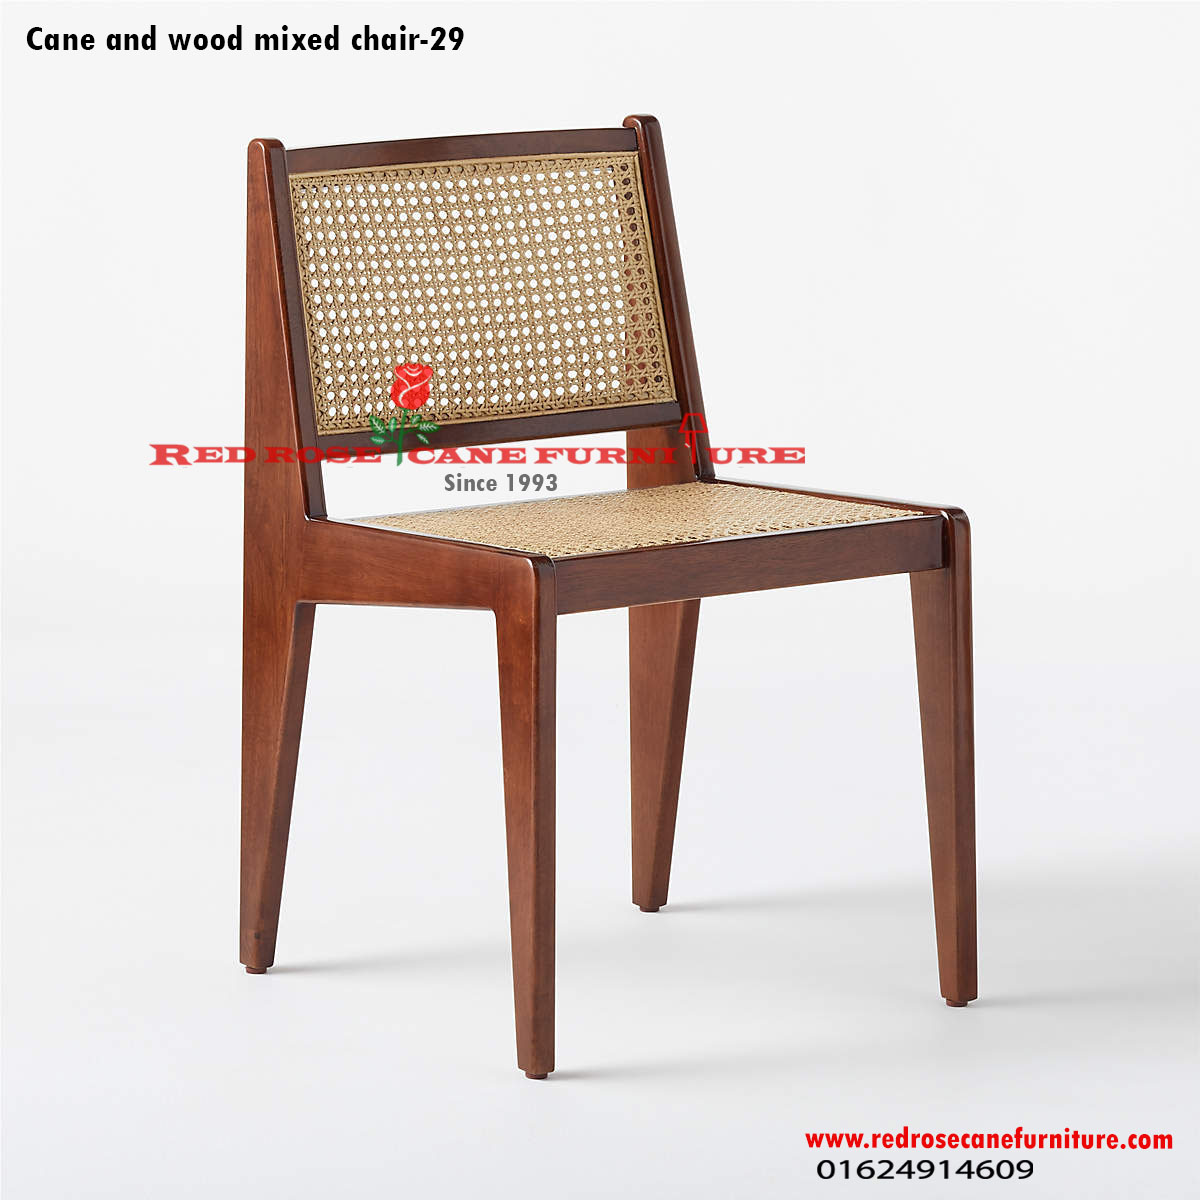 cane and wood mixed chair 29